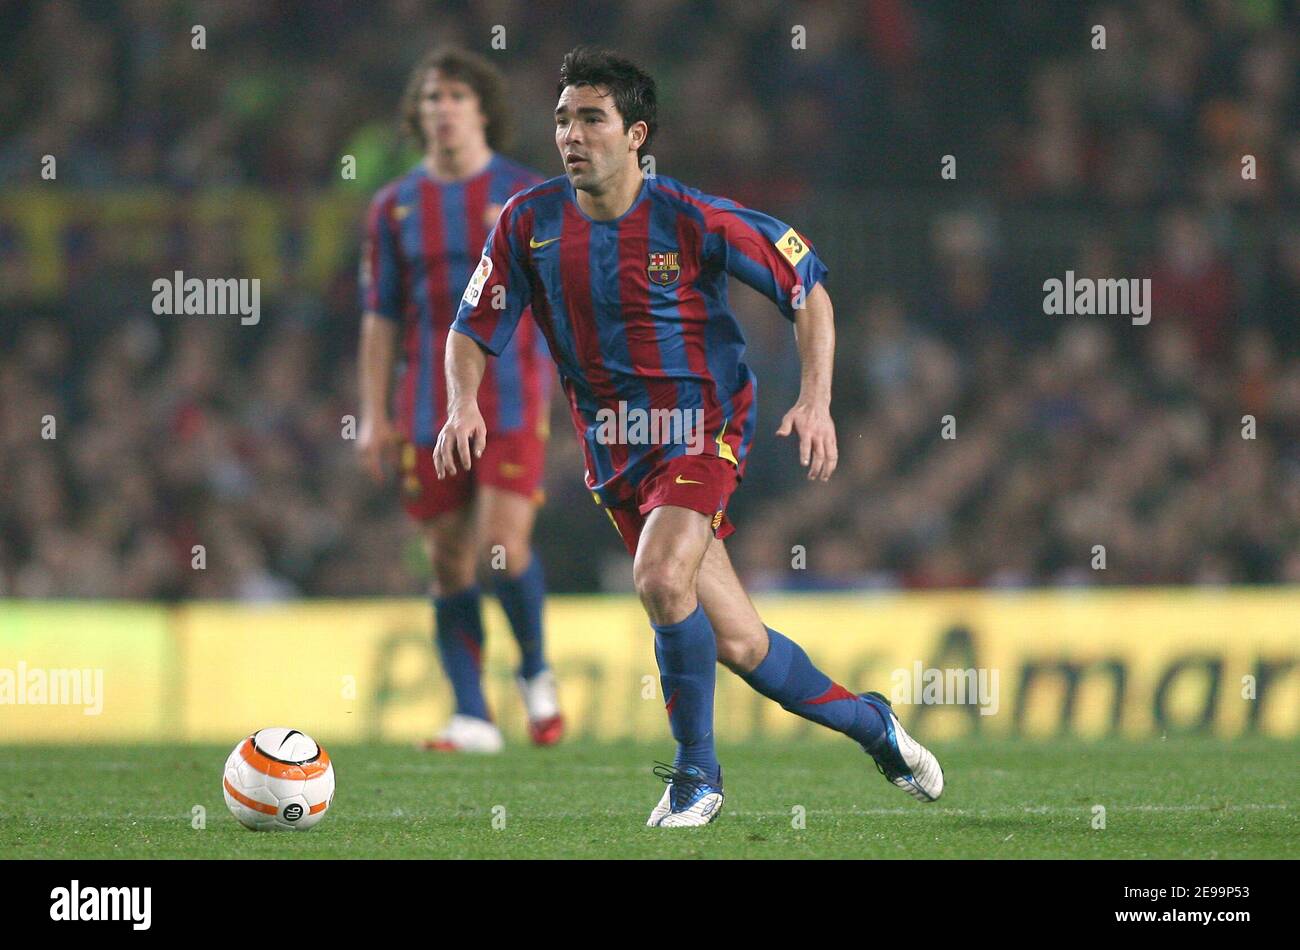 Barcelona's Deco during the Spanish primera league, FC Barcelona vs Real Madrid, at the Nou Camp Stadium, in Barcelona, Spain, on April 1, 2006. The game ended in a draw 1-1. Photo by Christian Liewig/ABACAPRESS.COM Stock Photo